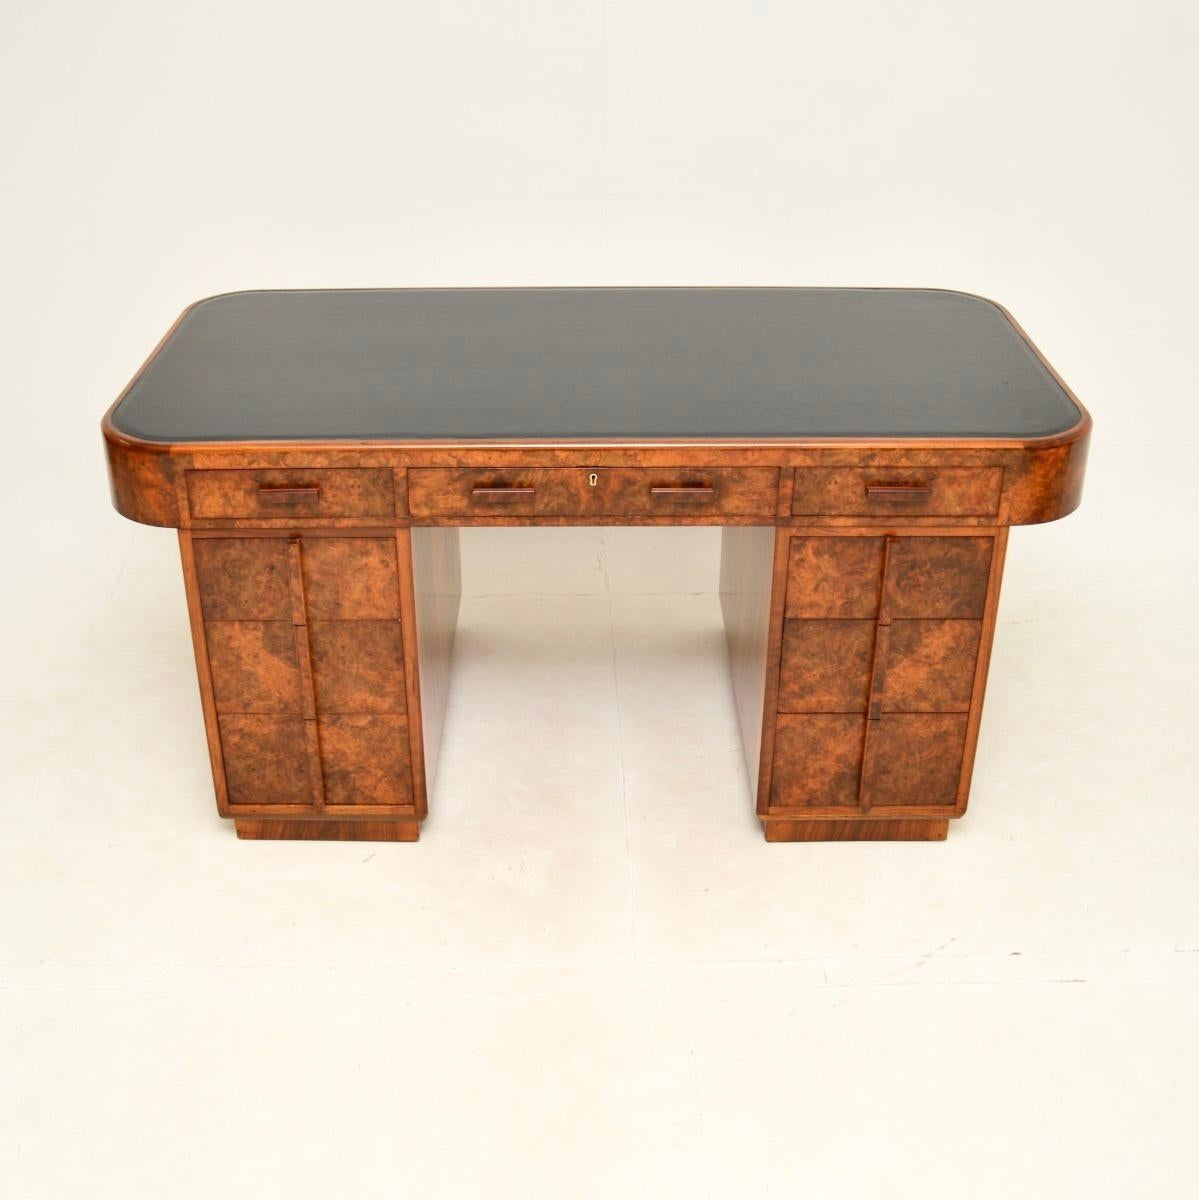 An absolutely magnificent Art Deco burr walnut leather top partners desk. This was made in England, it dates from the 1920-30’s.

The quality is outstanding, this has an extremely impressive and interesting design and it is one of the finest